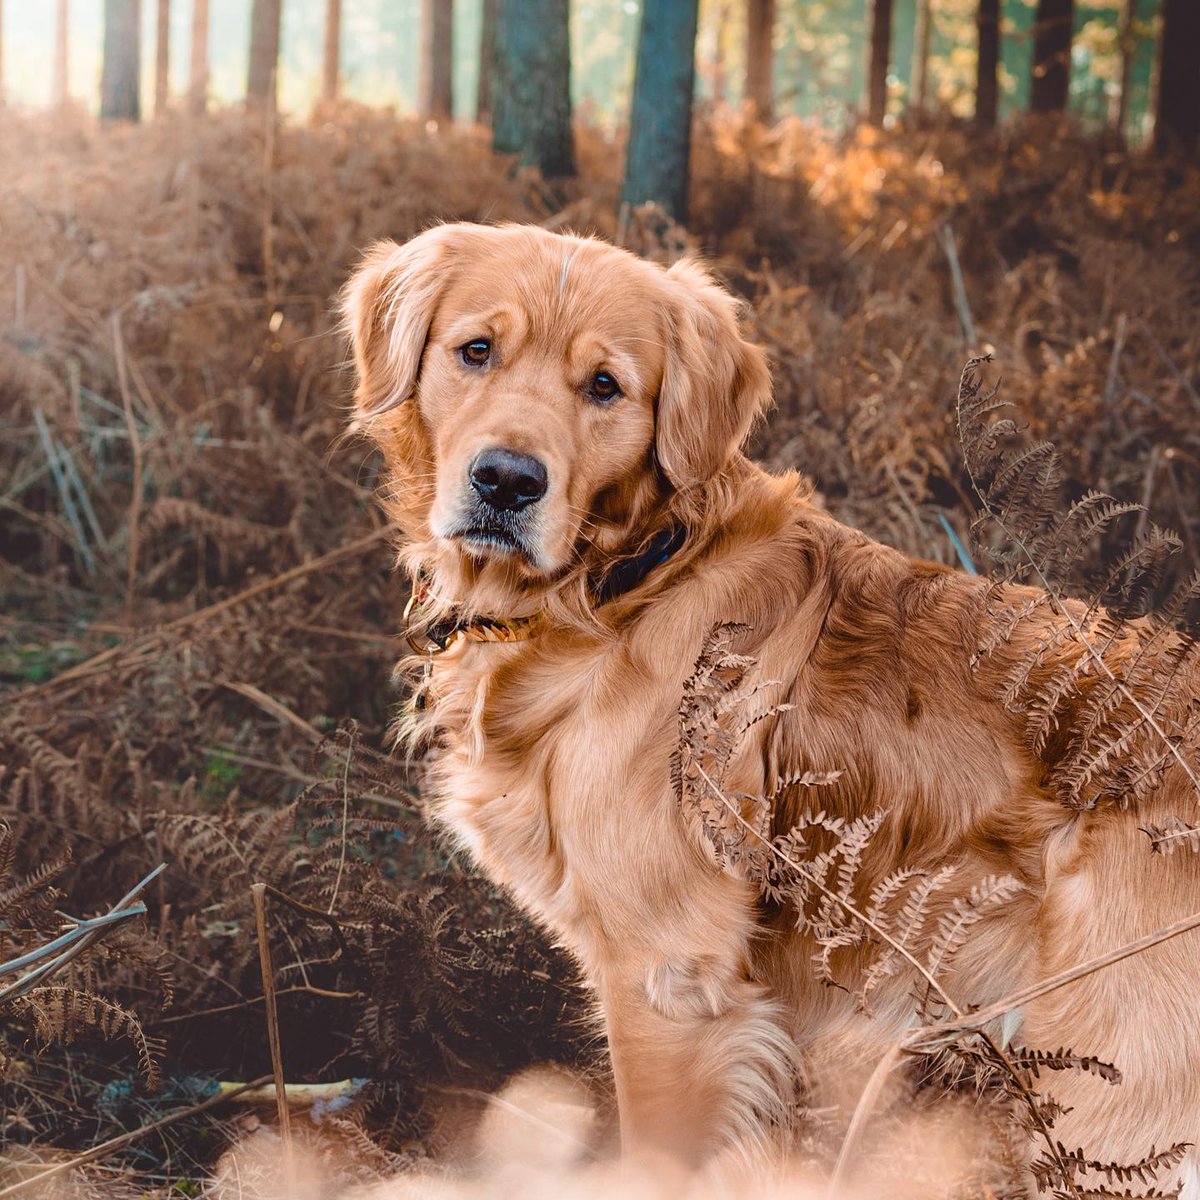 When you try to blend in but still stand out ✨ Happy Weekend everyone 🎉

#dogsoftwitter #dogs #goldenretriver #ilovegoldens #ilovegolden_retrievers